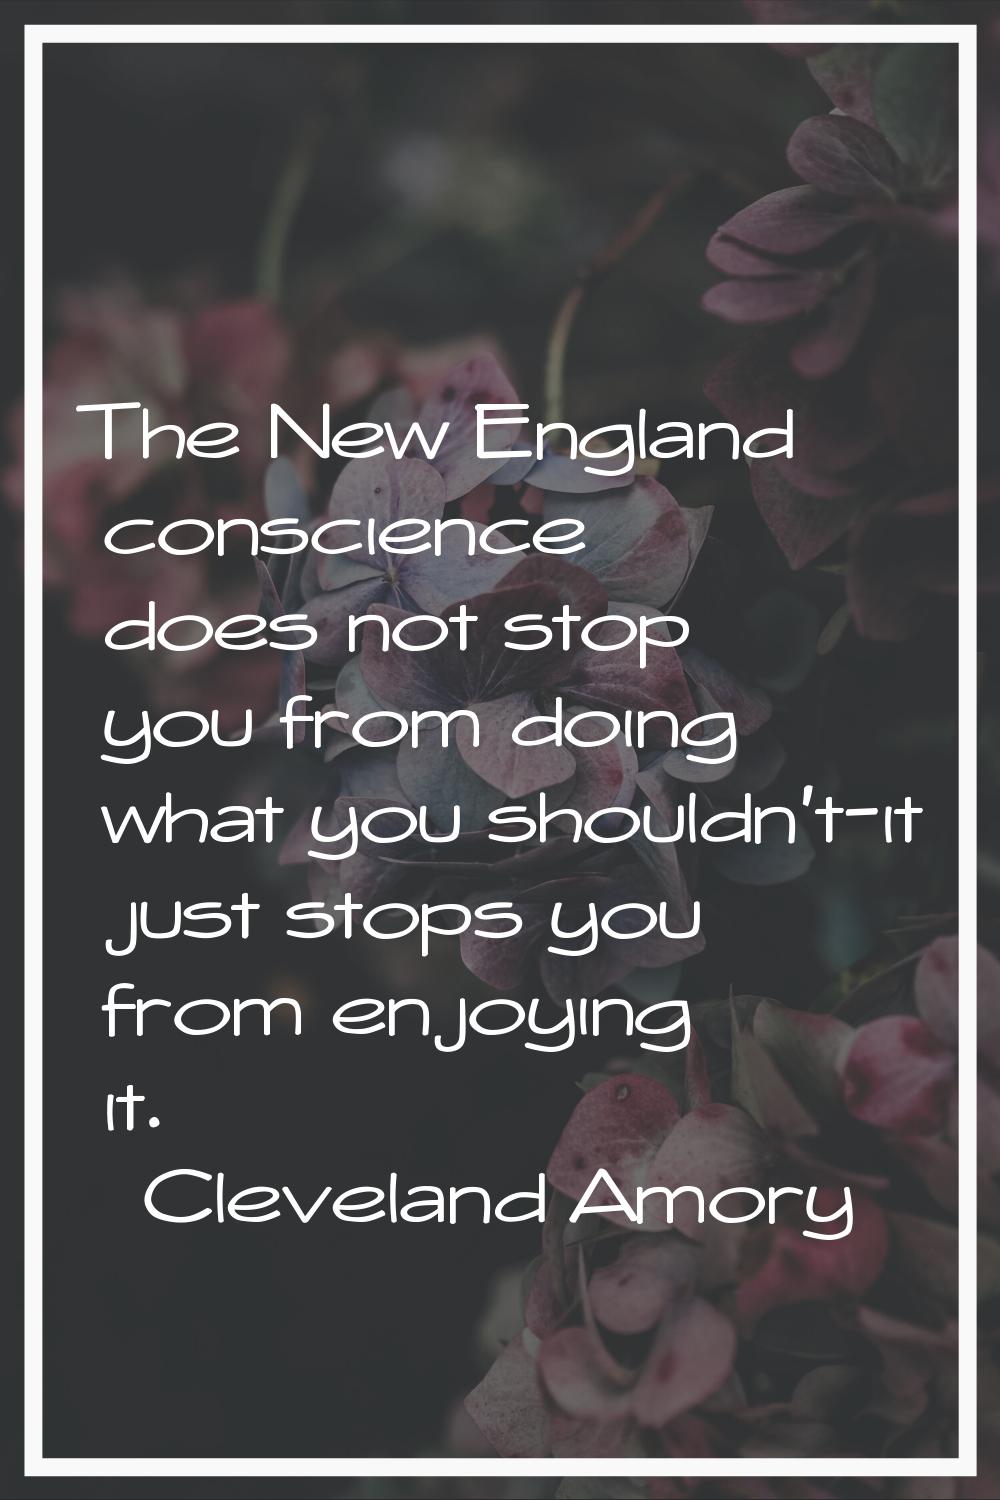 The New England conscience does not stop you from doing what you shouldn't-it just stops you from e